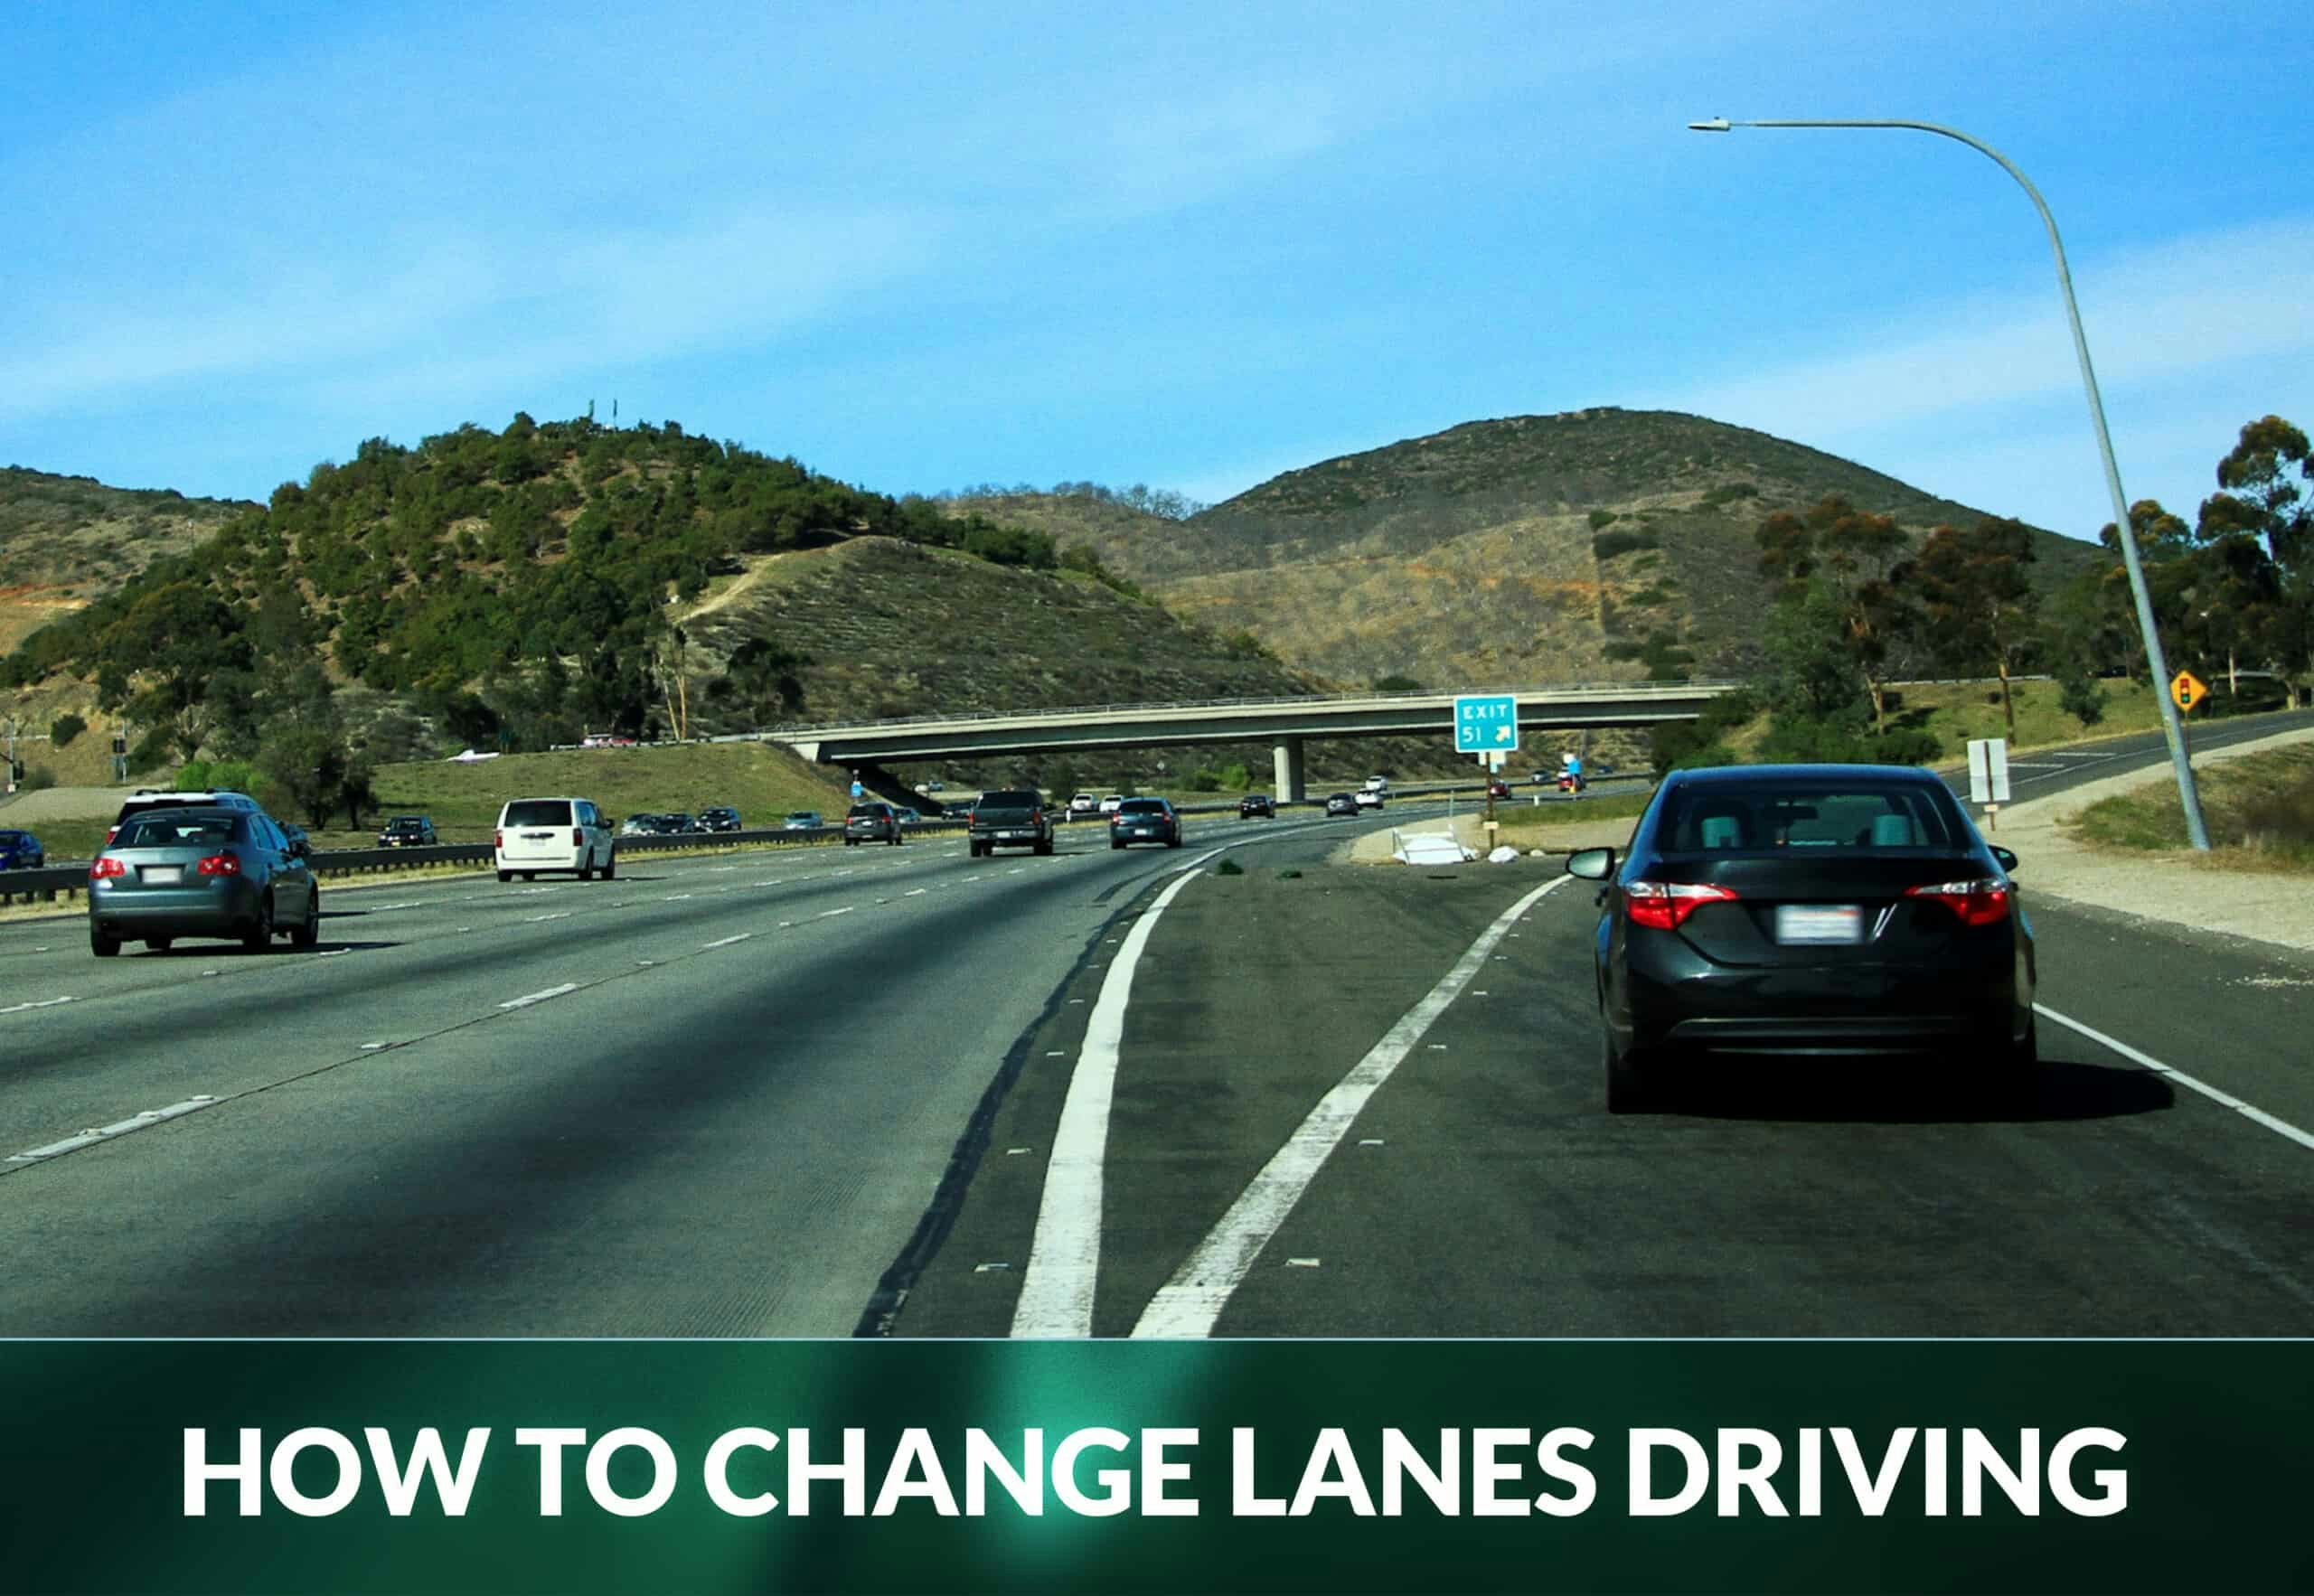 What are some tips for changing lanes when driving? - Quora